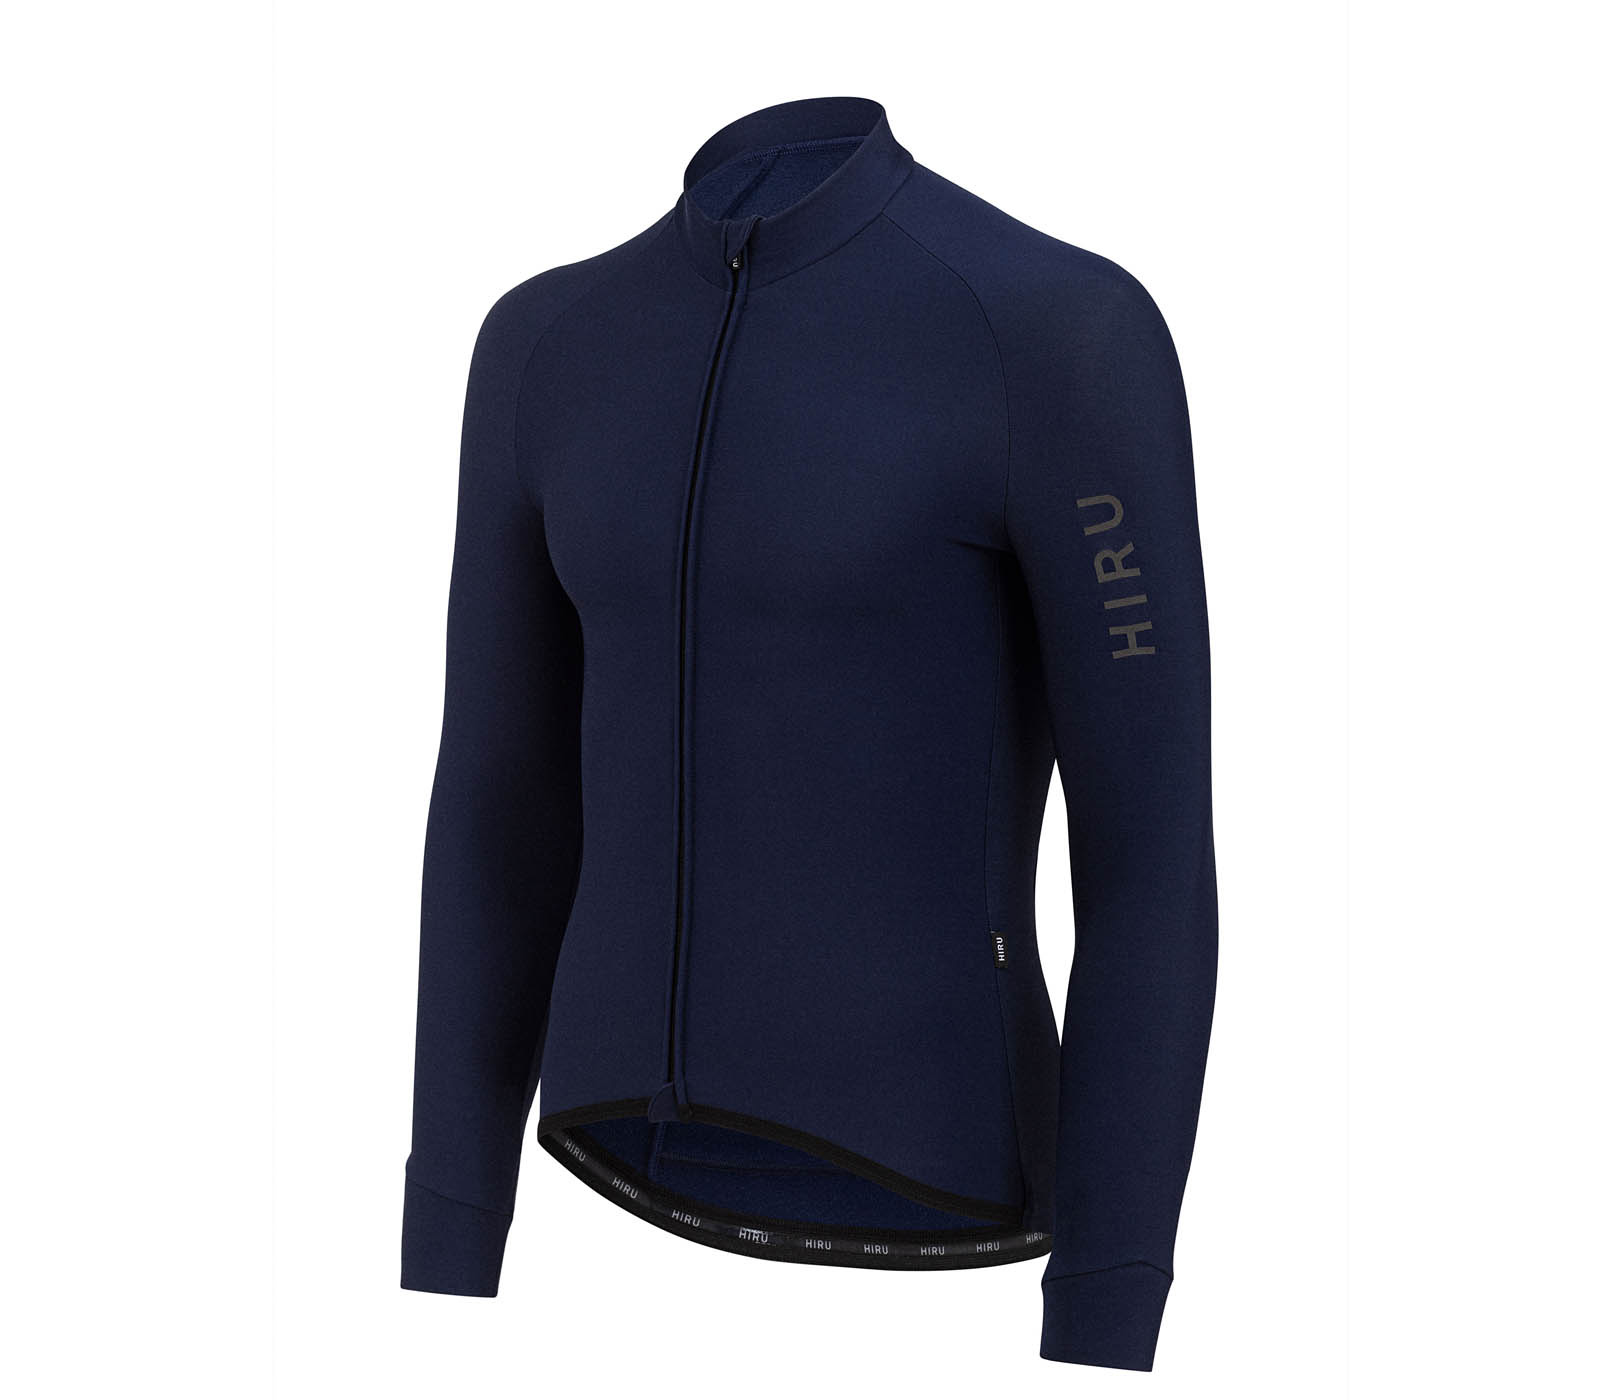 MEN'S CORE THERMAL LONG SLEEVE JERSEY